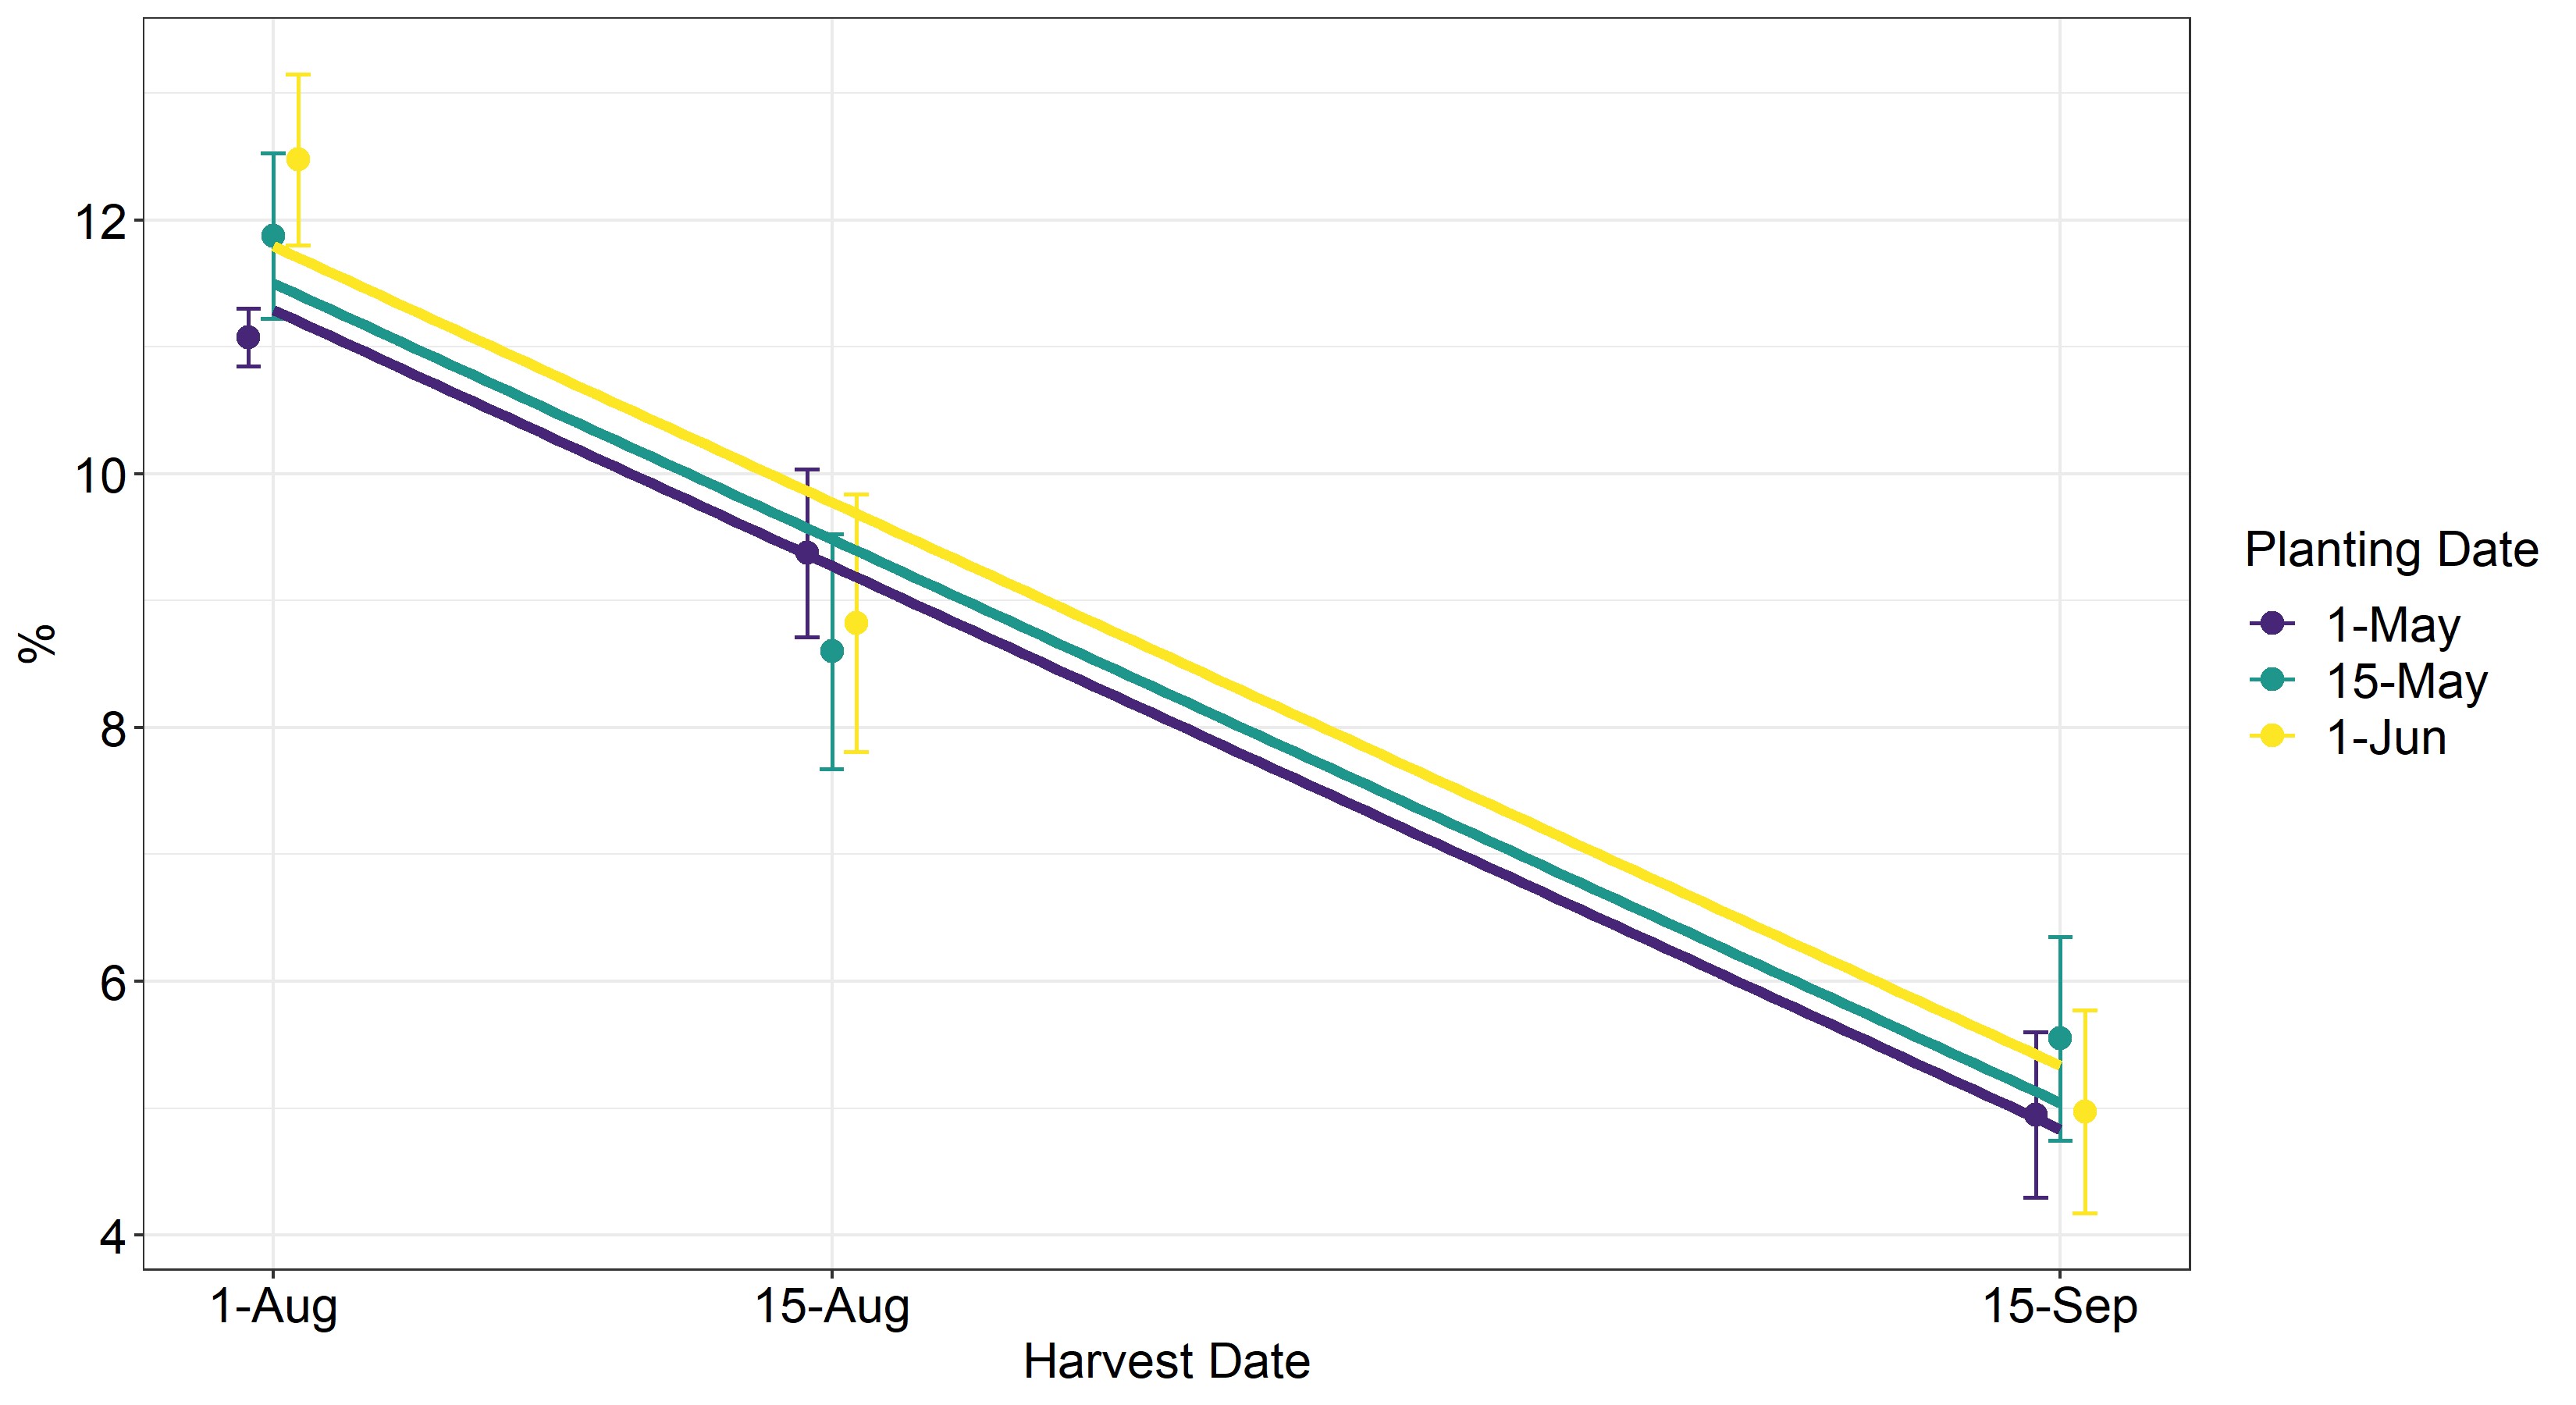 Figure of the protein % over harvest date